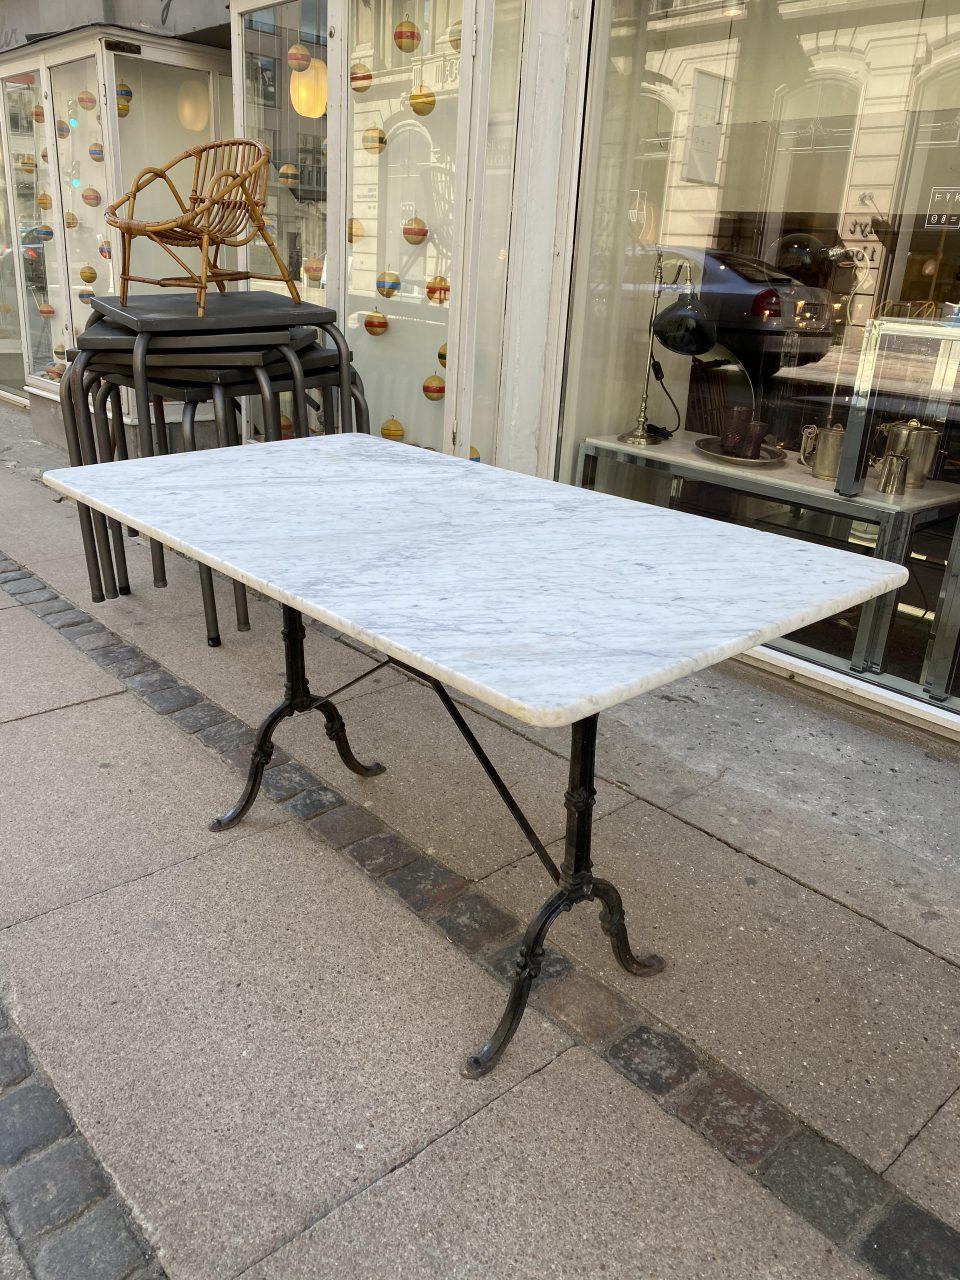 Handsome vintage French bistro table, with an elegant sleek black cast iron underframe and wonderfully large marble top. The slight patina on the surface only adding to the charm.